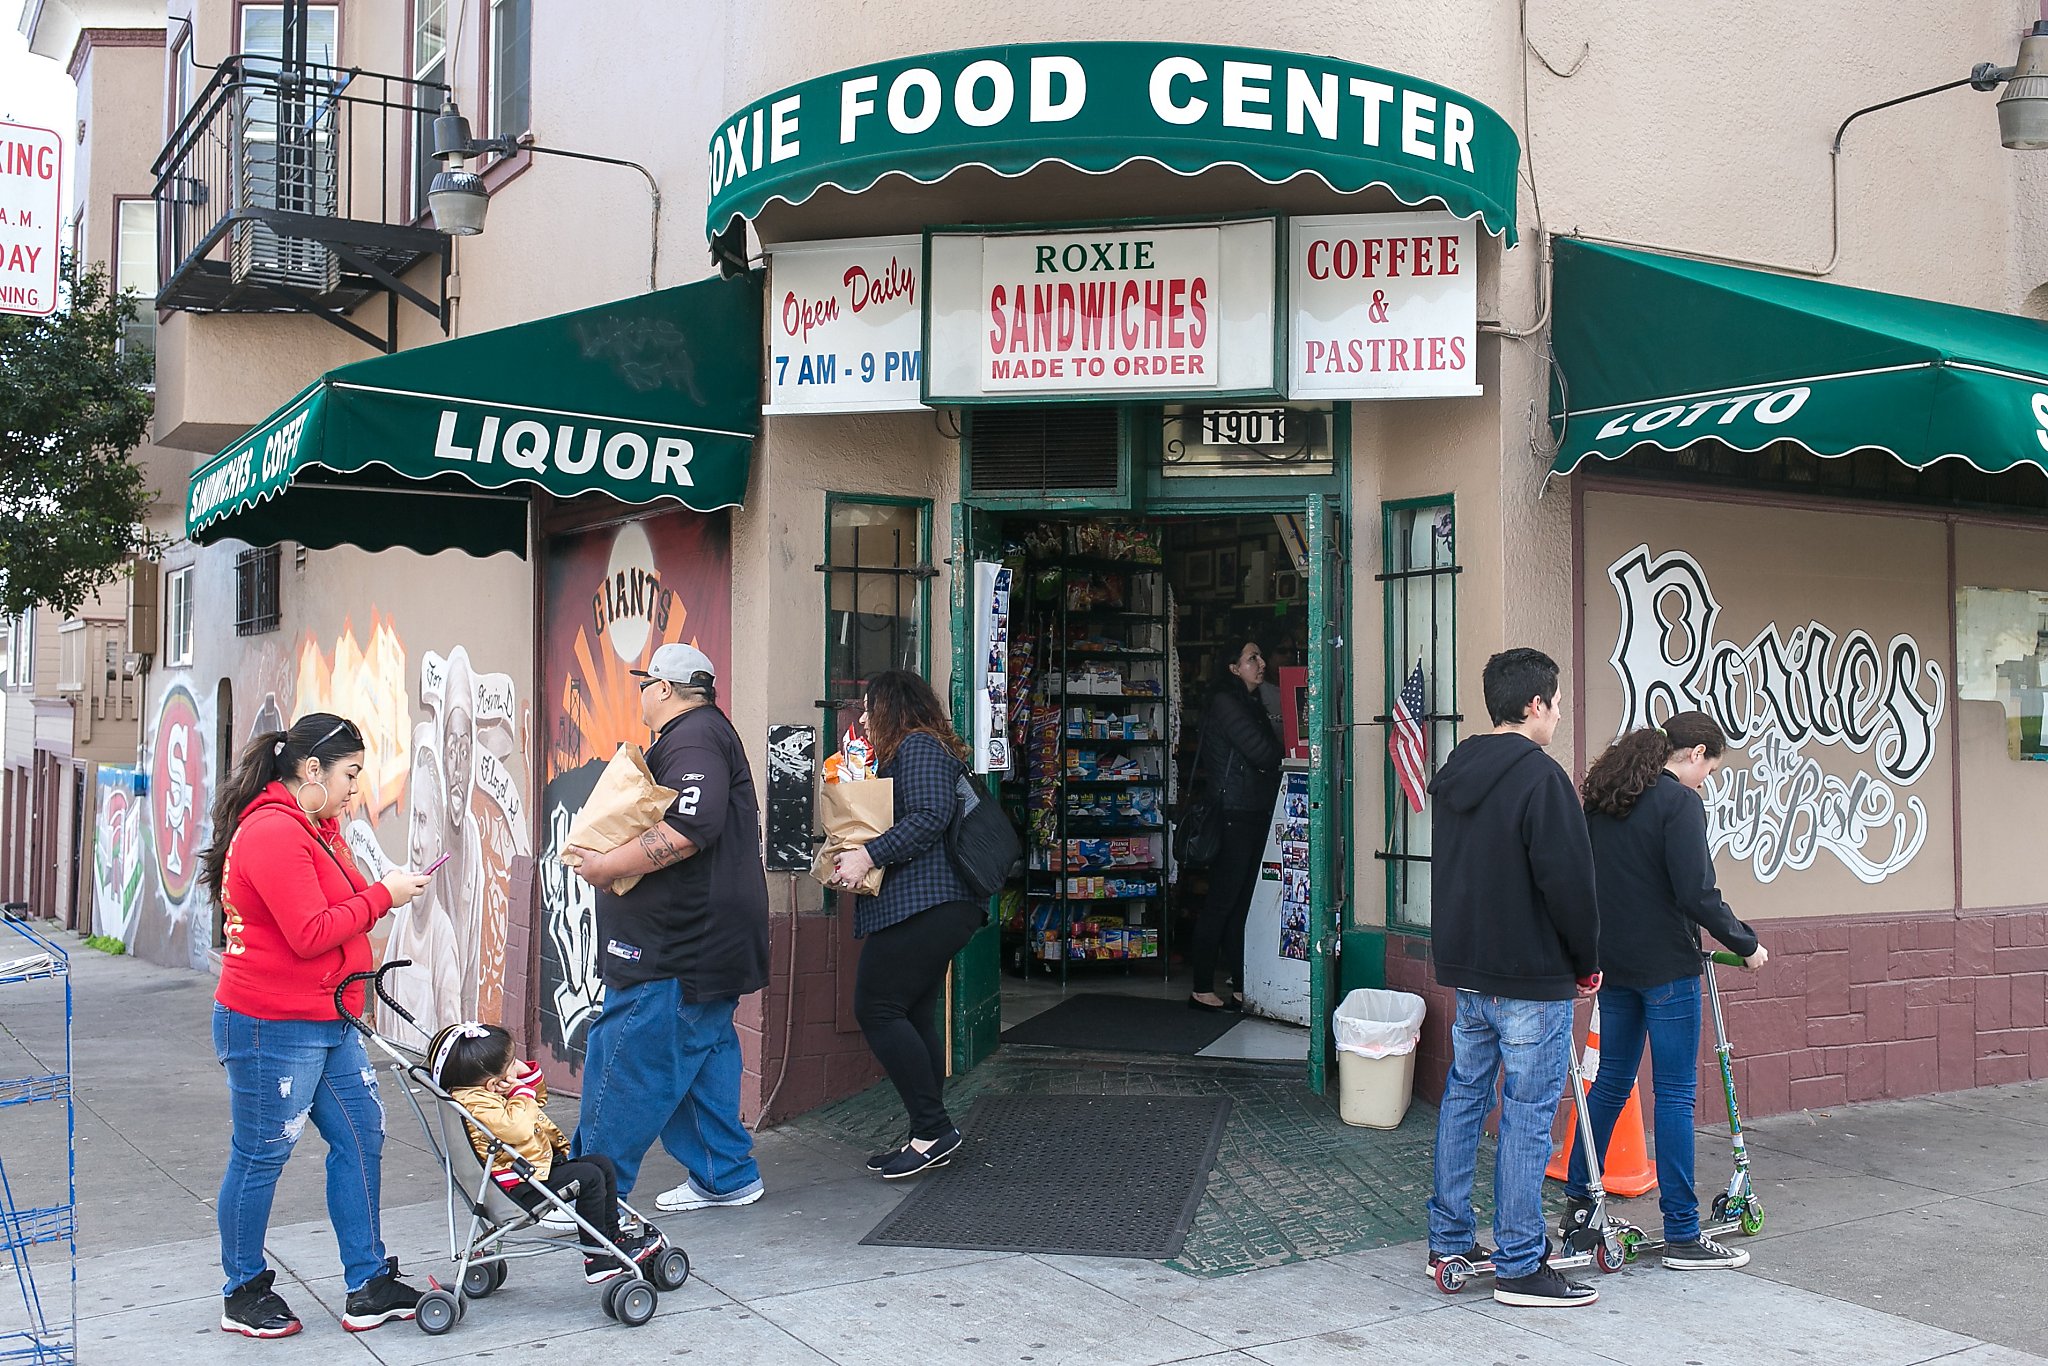 San Francisco's top-rated cheap eats, according to Yelp